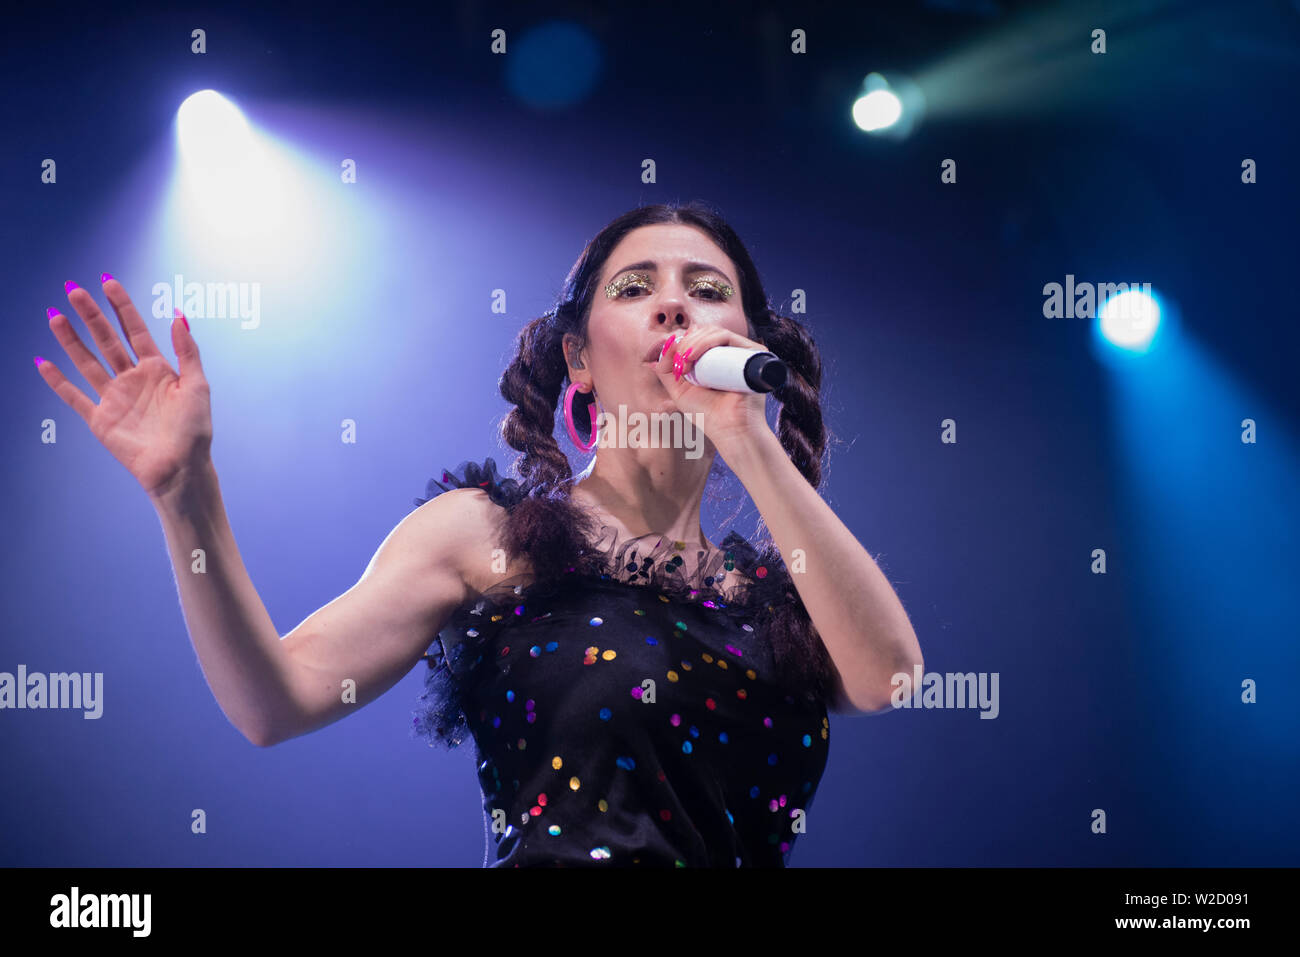 Turku, Finland. 7th July 2019. Welsh singer songwriter Marina performs at the 50th Ruisrock Festival. (Photo: Stefan Crämer) Stock Photo